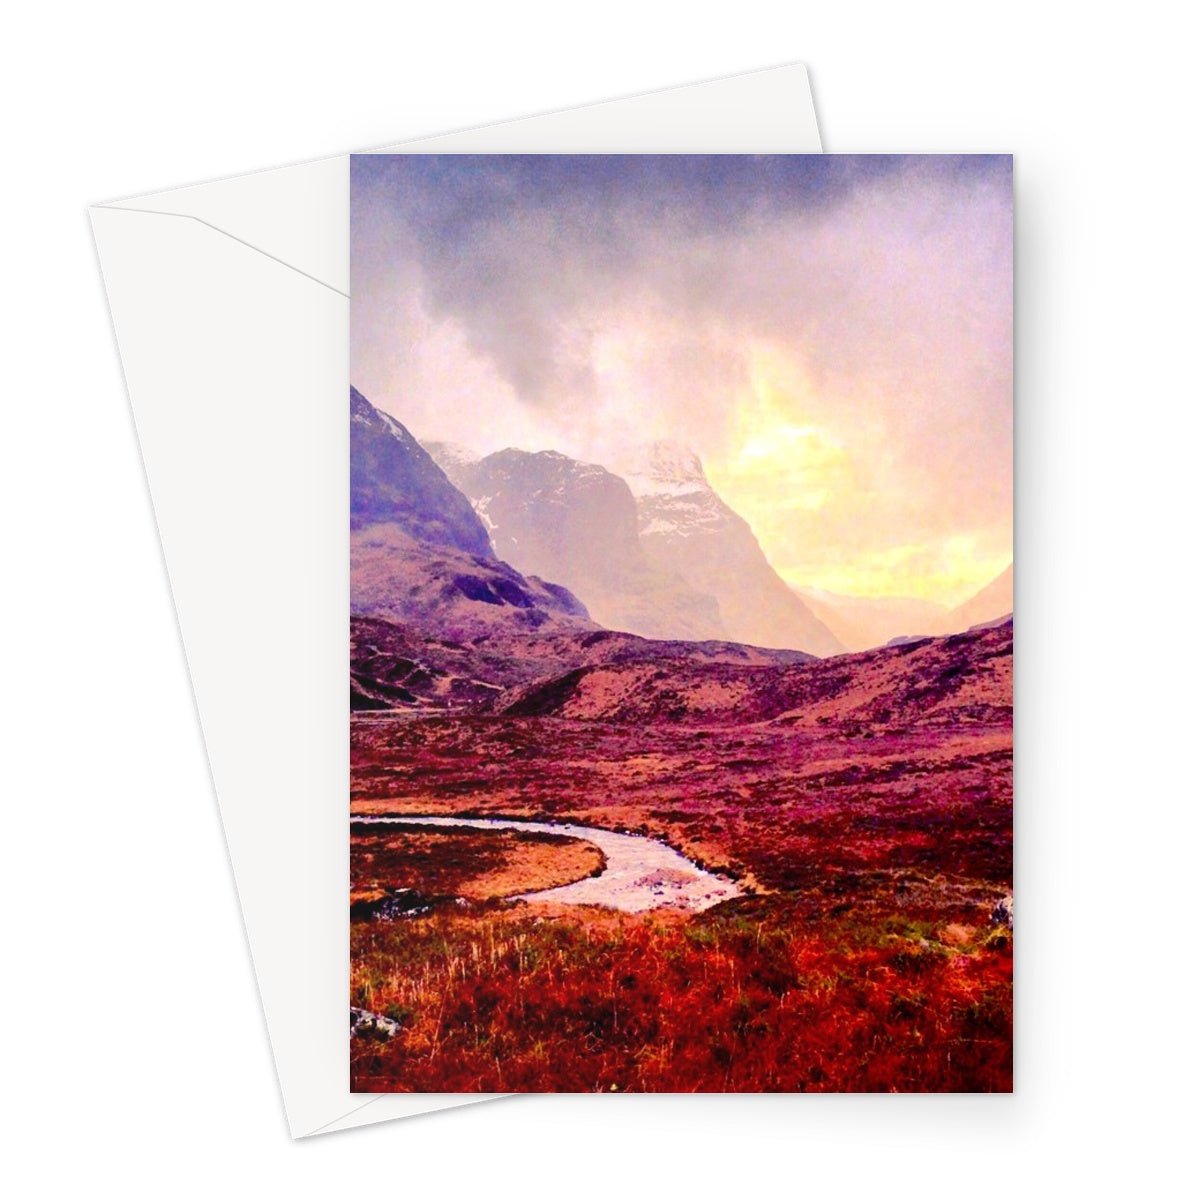 A Brooding Glencoe Art Gifts Greeting Card-Greetings Cards-Glencoe Art Gallery-A5 Portrait-10 Cards-Paintings, Prints, Homeware, Art Gifts From Scotland By Scottish Artist Kevin Hunter